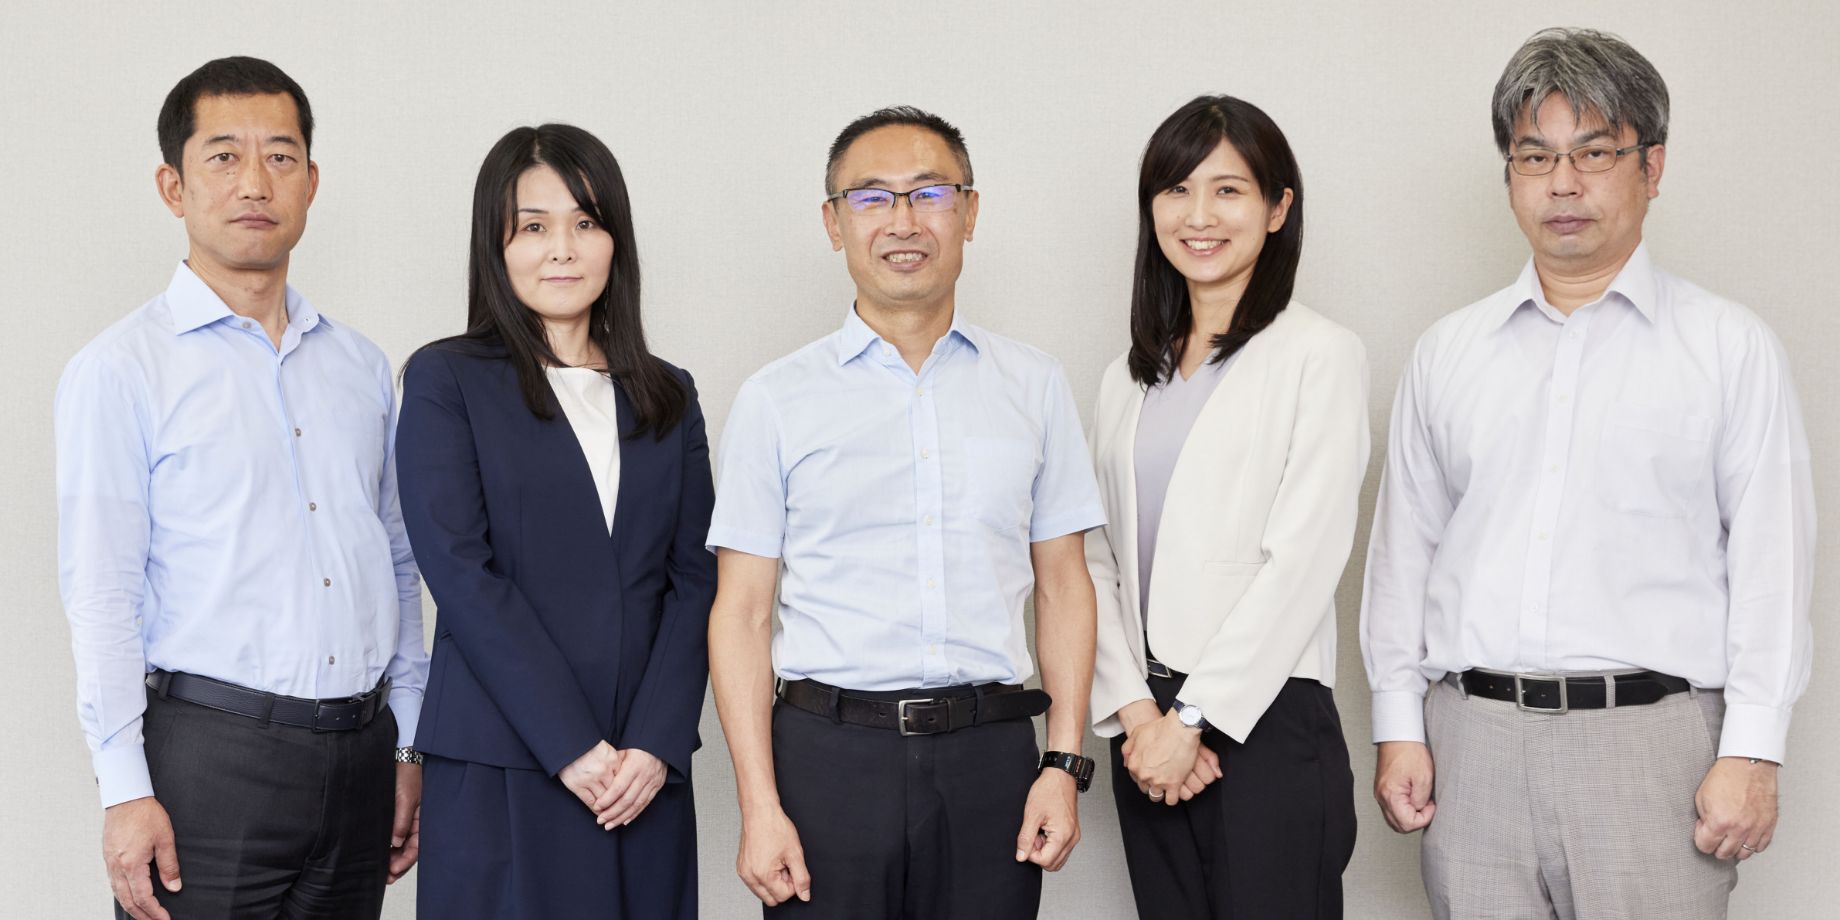 Dr. Mori with others in charge of promoting health and productivity management, Personnel Division, Tokyo Century (Kosaki, Kamimura, Miyazawa, and Takagi)